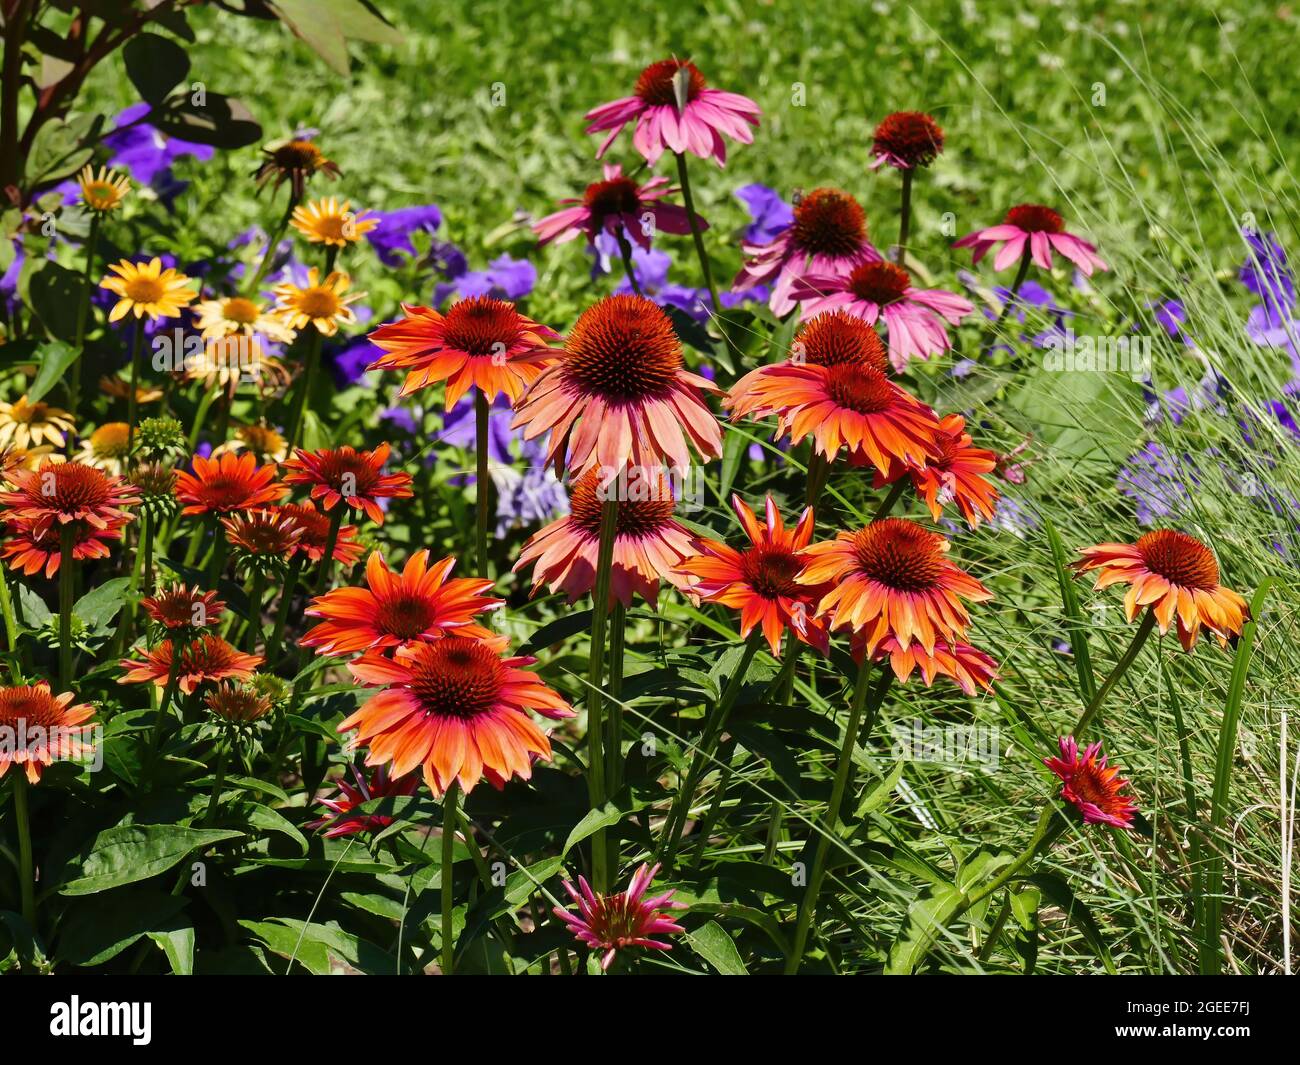 A nice garden patch full of blooming Echinacea flowers of varying colors on a sunny day. Stock Photo